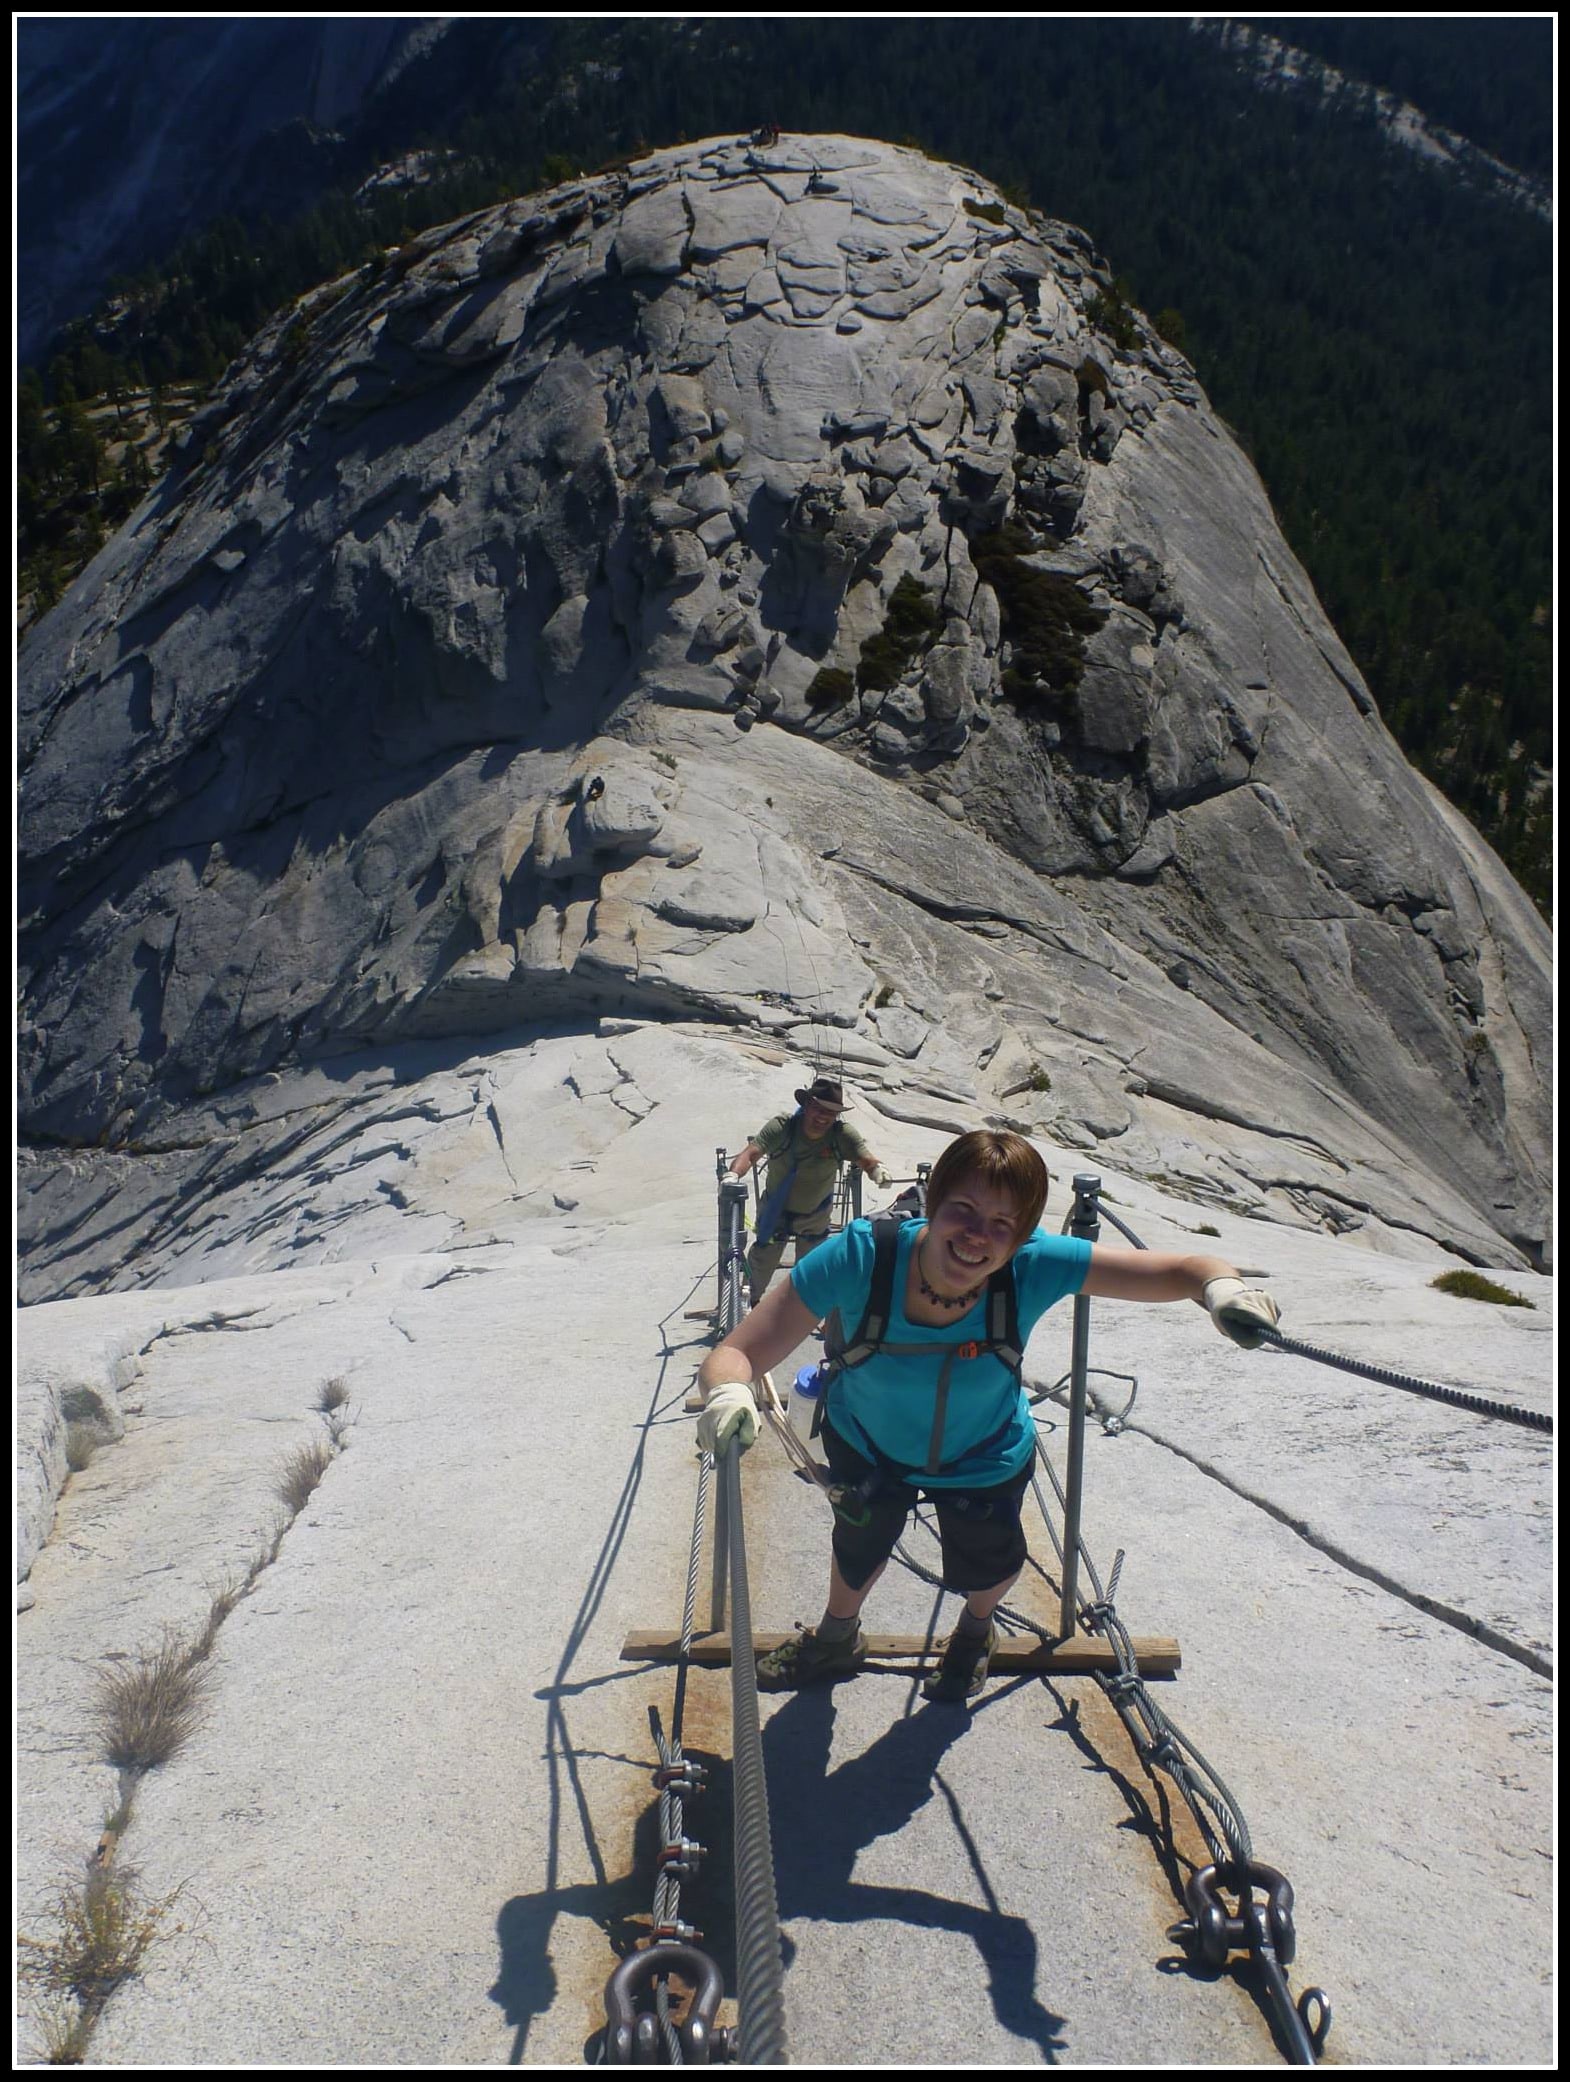 Guided Half Dome Trek, Hike Half Dome with a Guide